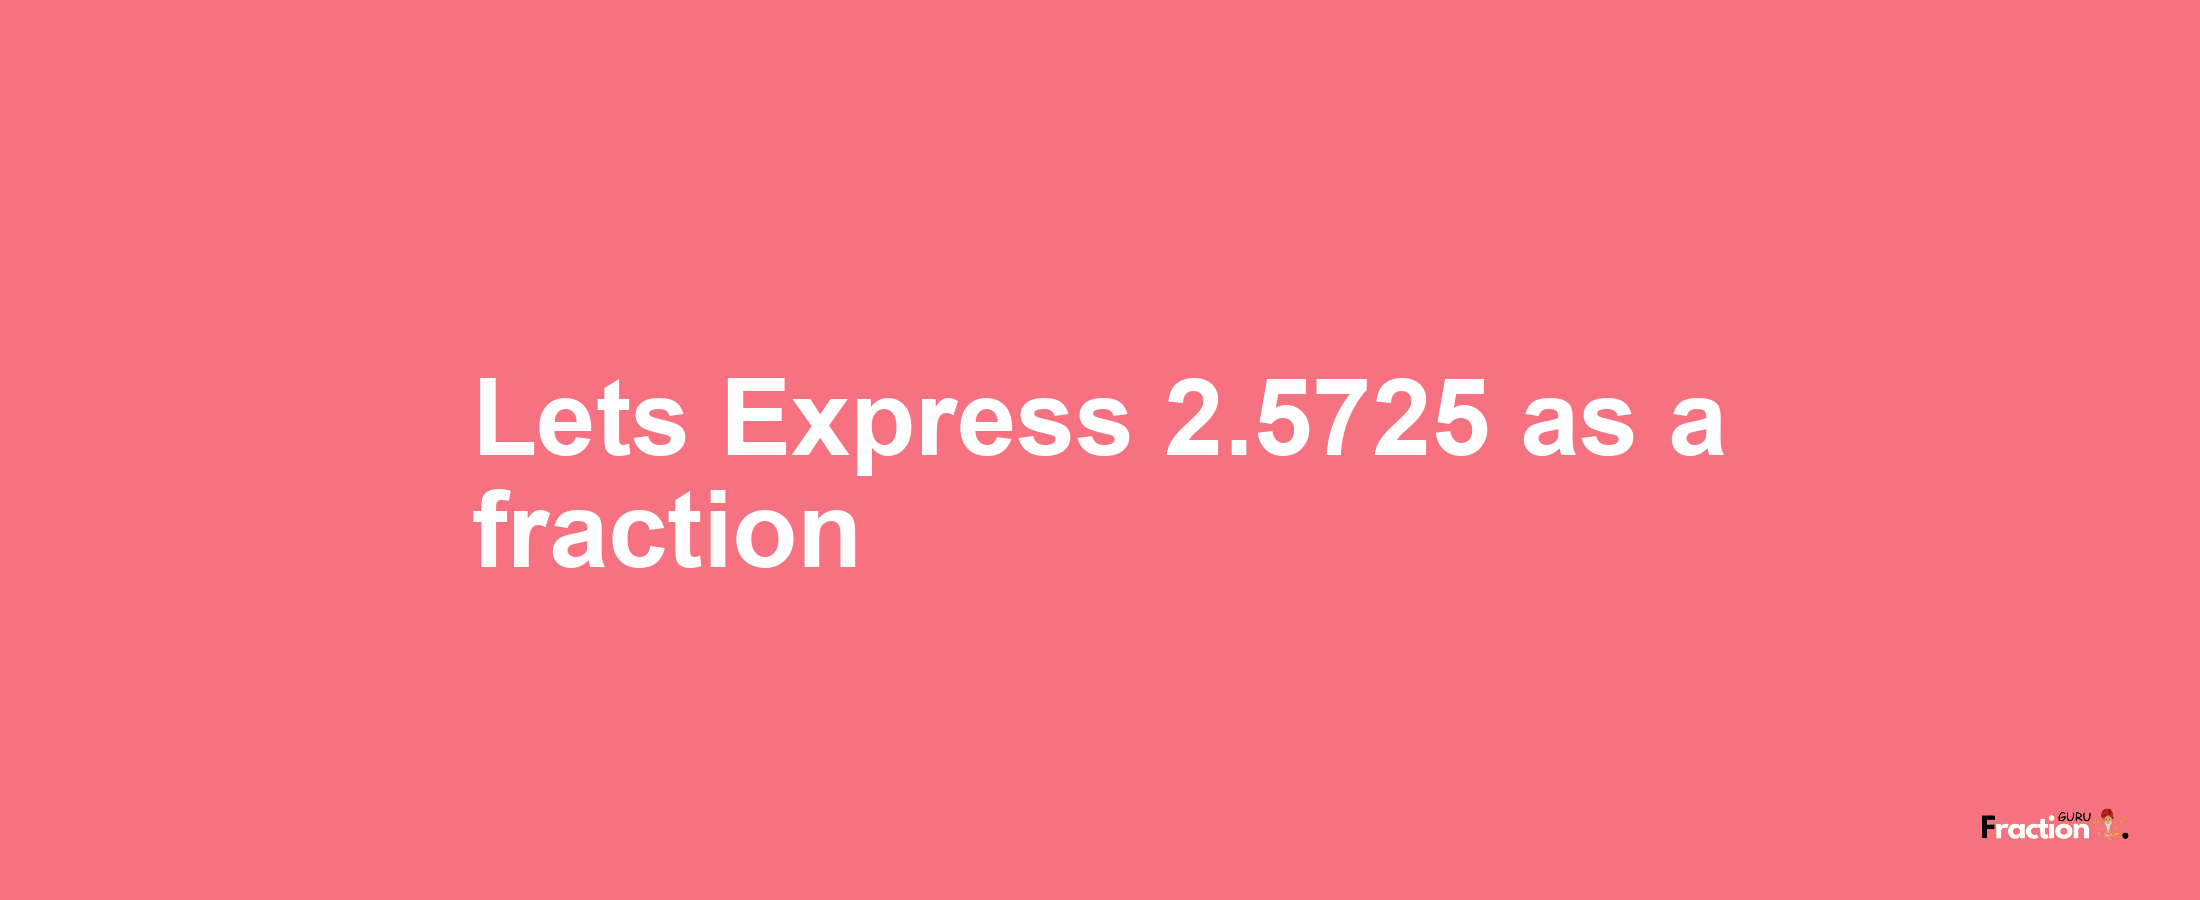 Lets Express 2.5725 as afraction